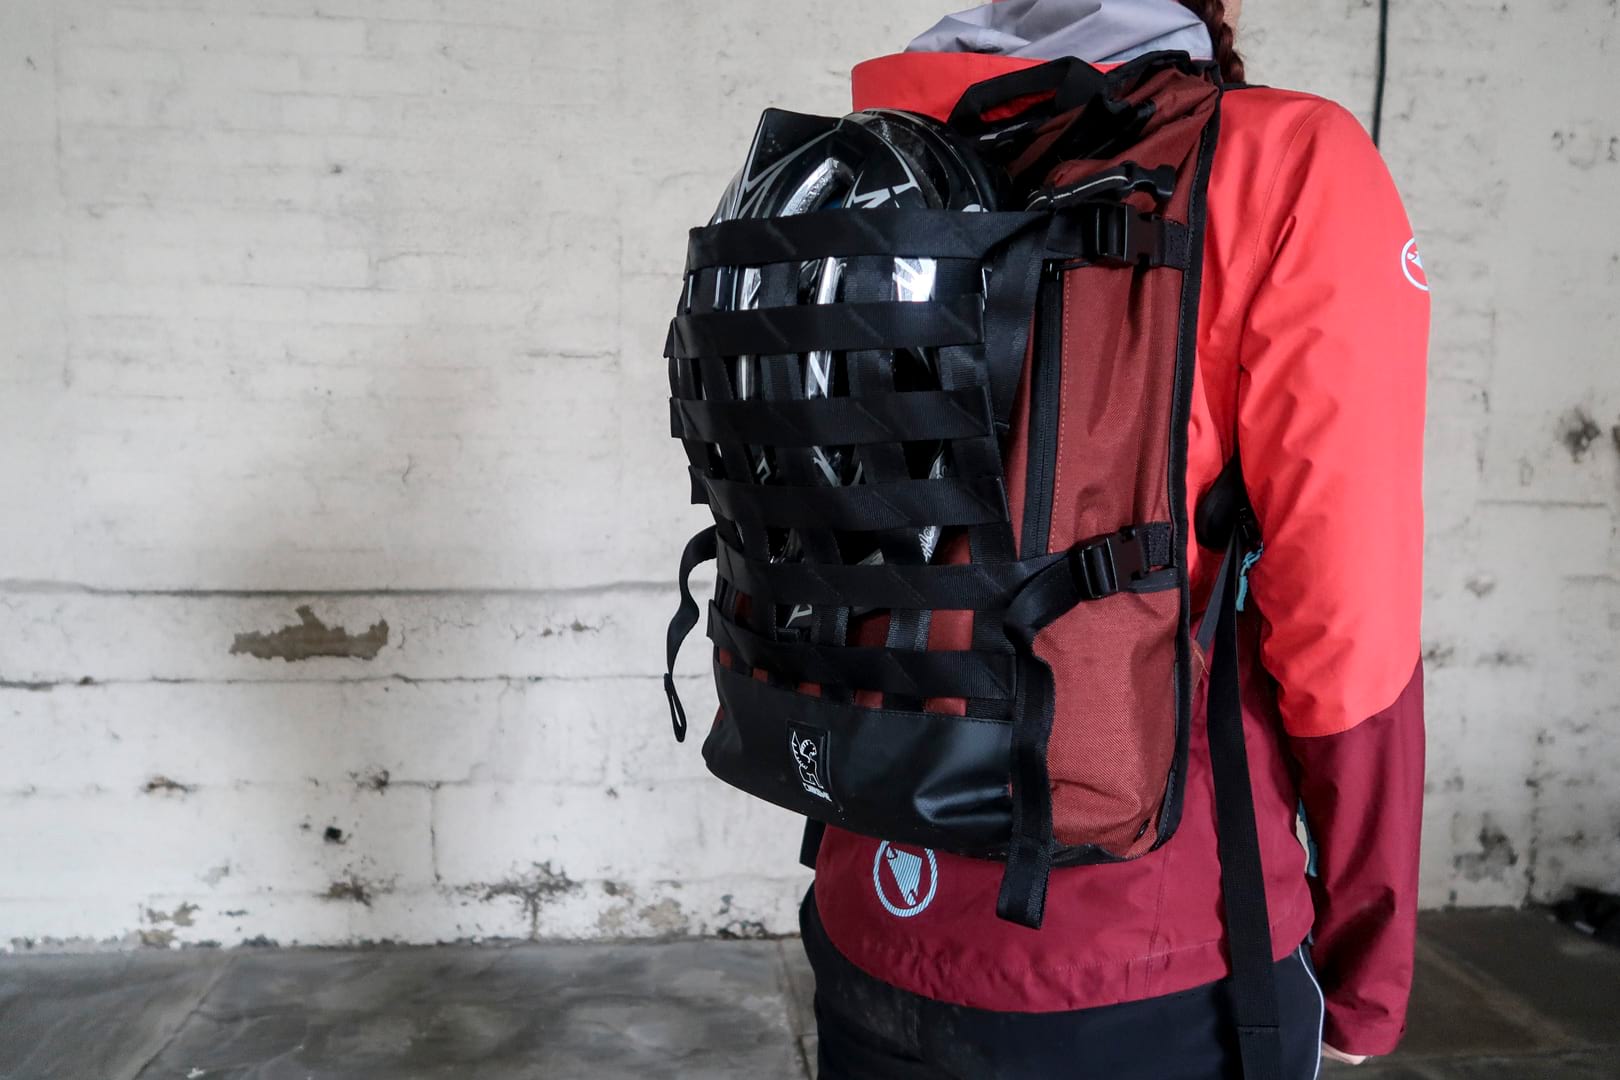 Chrome Barrage Cargo Backpack - For Commuters With a Heavy Load